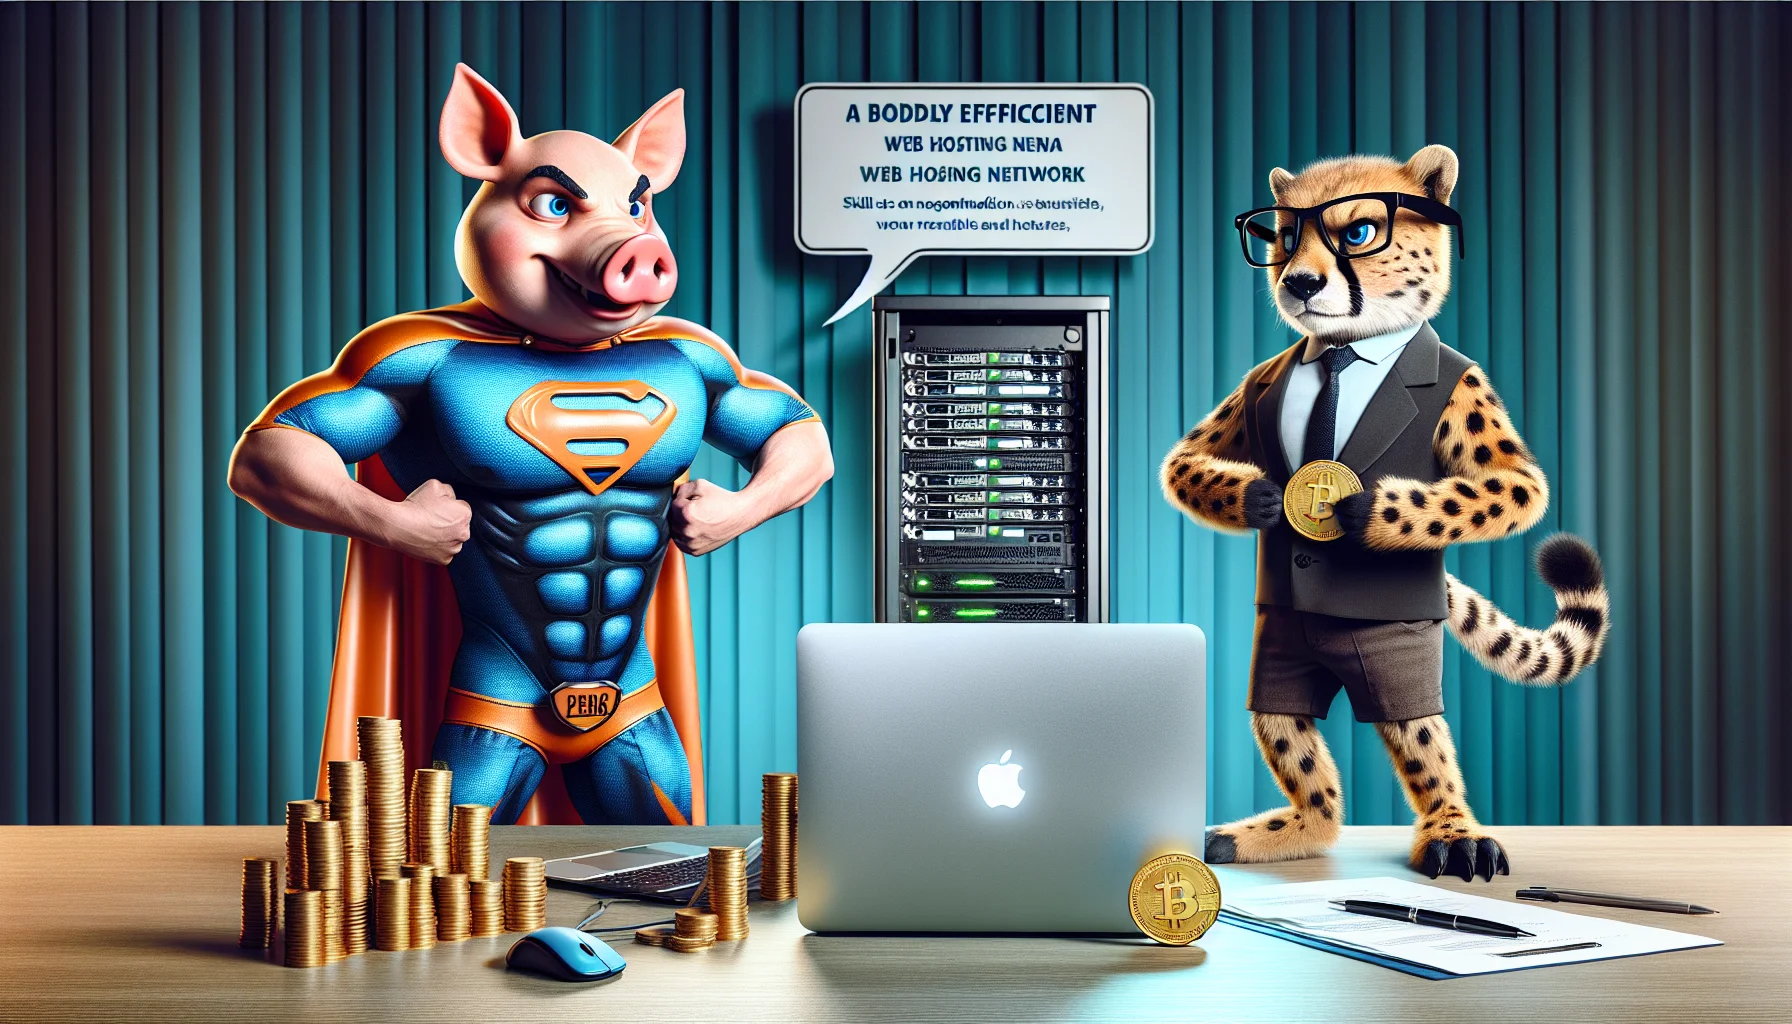 Create a humorous scene involving two rival tech characters. One character, who symbolizes PorkBun, is a dynamic pig wearing a superhero's costume complete with a cape, flexing his muscles above a laptop showing a boldly efficient web hosting network. In contrast, the character representing NameCheap, is a frugal-looking cheetah with glasses, skills in negotiation and a golden coin, standing on a server boasting about its affordable rates. The scene oozes satire, with both characters trying to impress the viewers about their respective web hosting services, enticing those interested in the tech world.